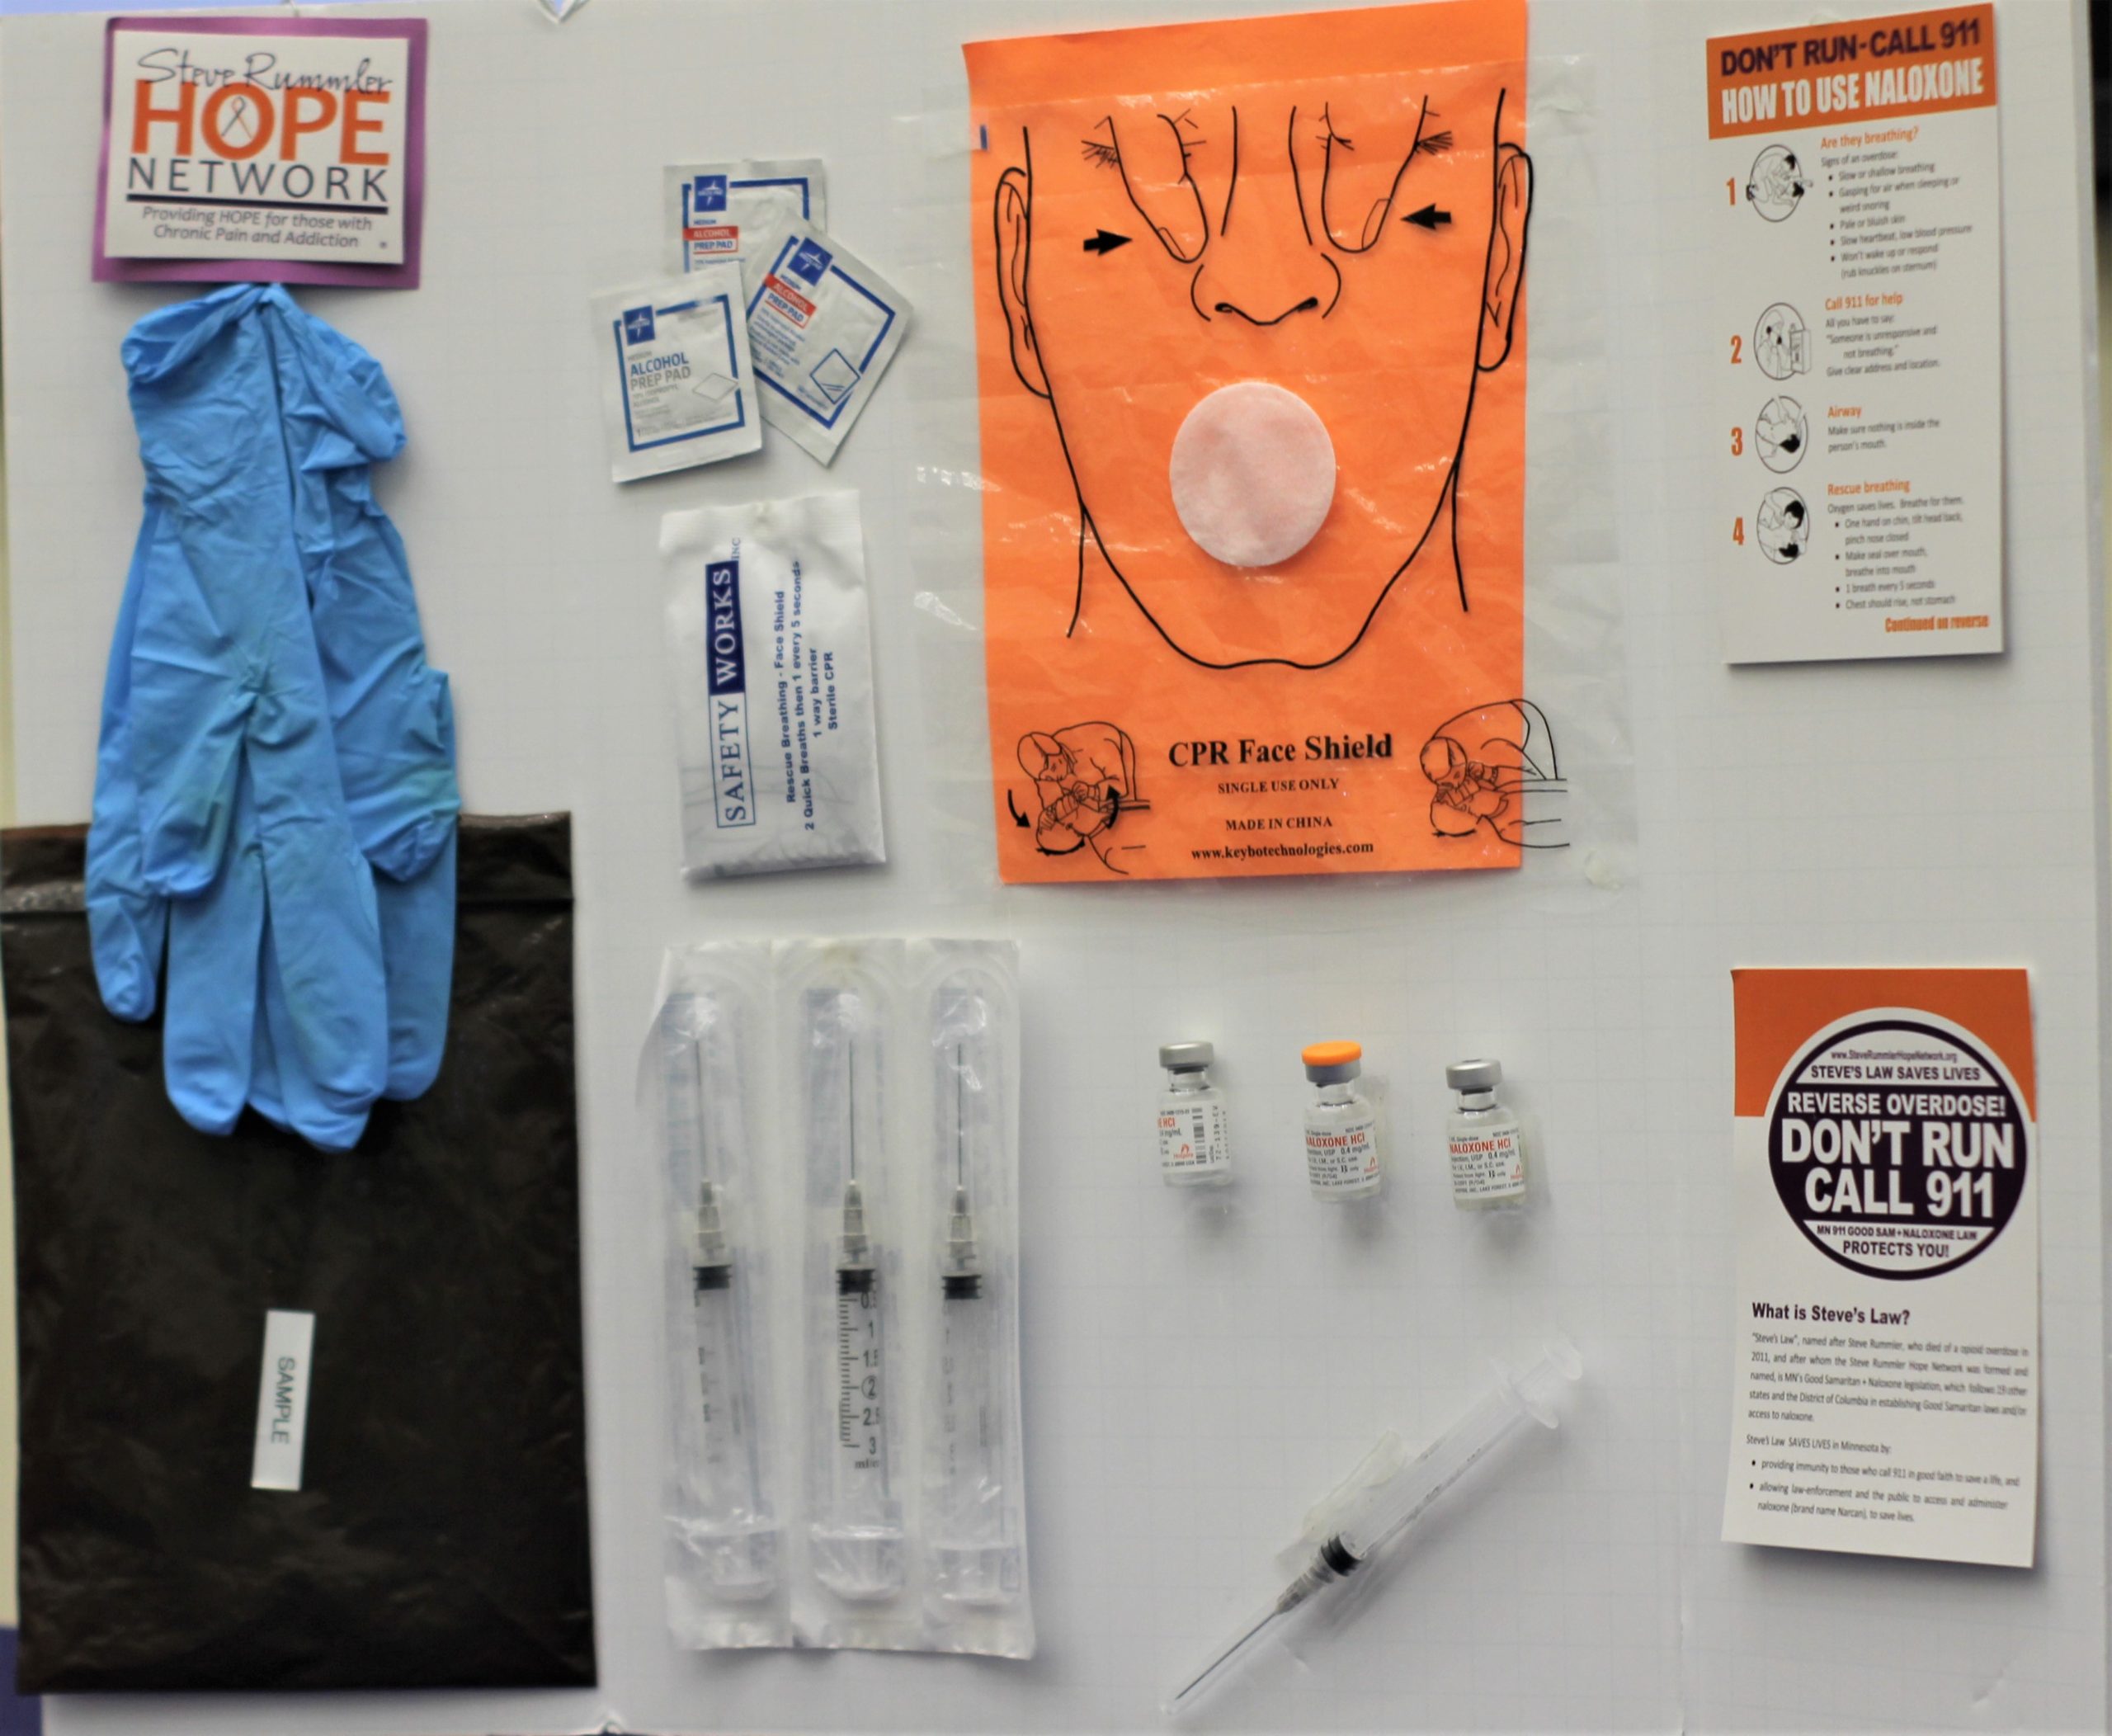 A poster board  is displayed during recent Metro State seminar discussing life saving measures to combat opioid abuse crisis. Attached to the board are items found within a standard emergency recovery kit. This event was held on March 3 and conducted by the Steve Rummler Hope Network (Brandon General/The Metropolitan)